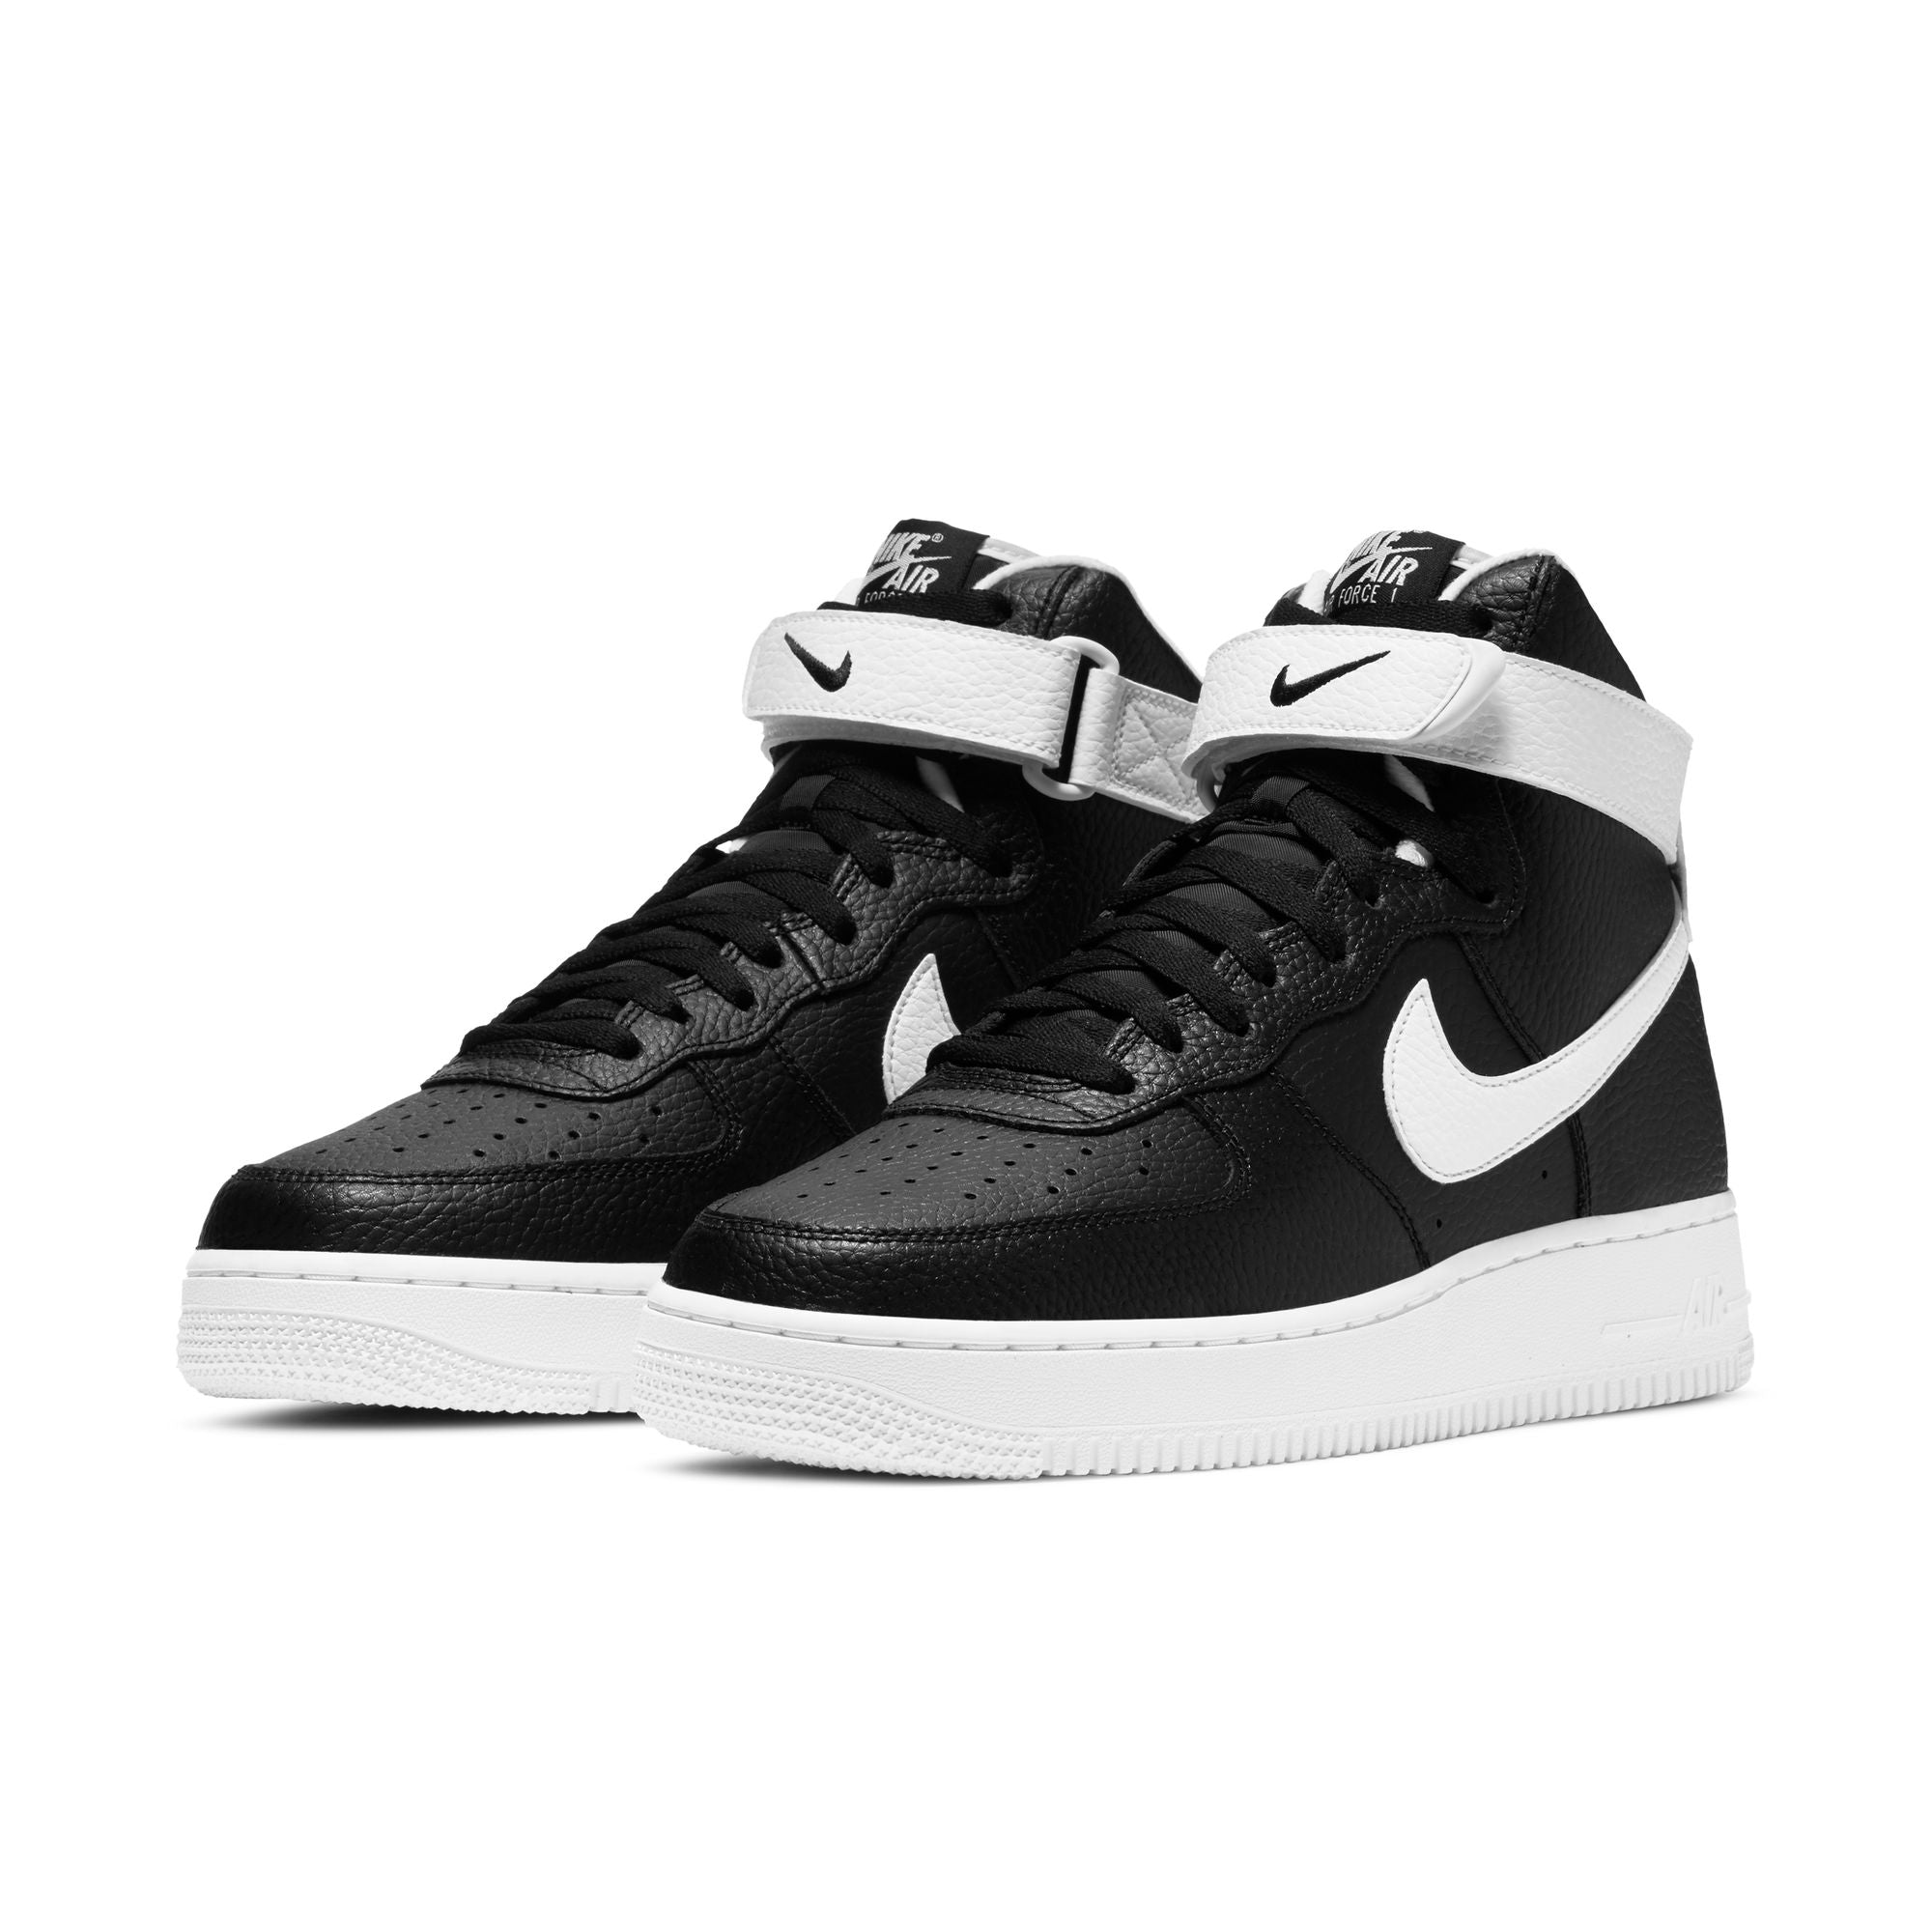 Nike Air Force 1 Mid '07 LV8 Men's Shoes Size-9.5